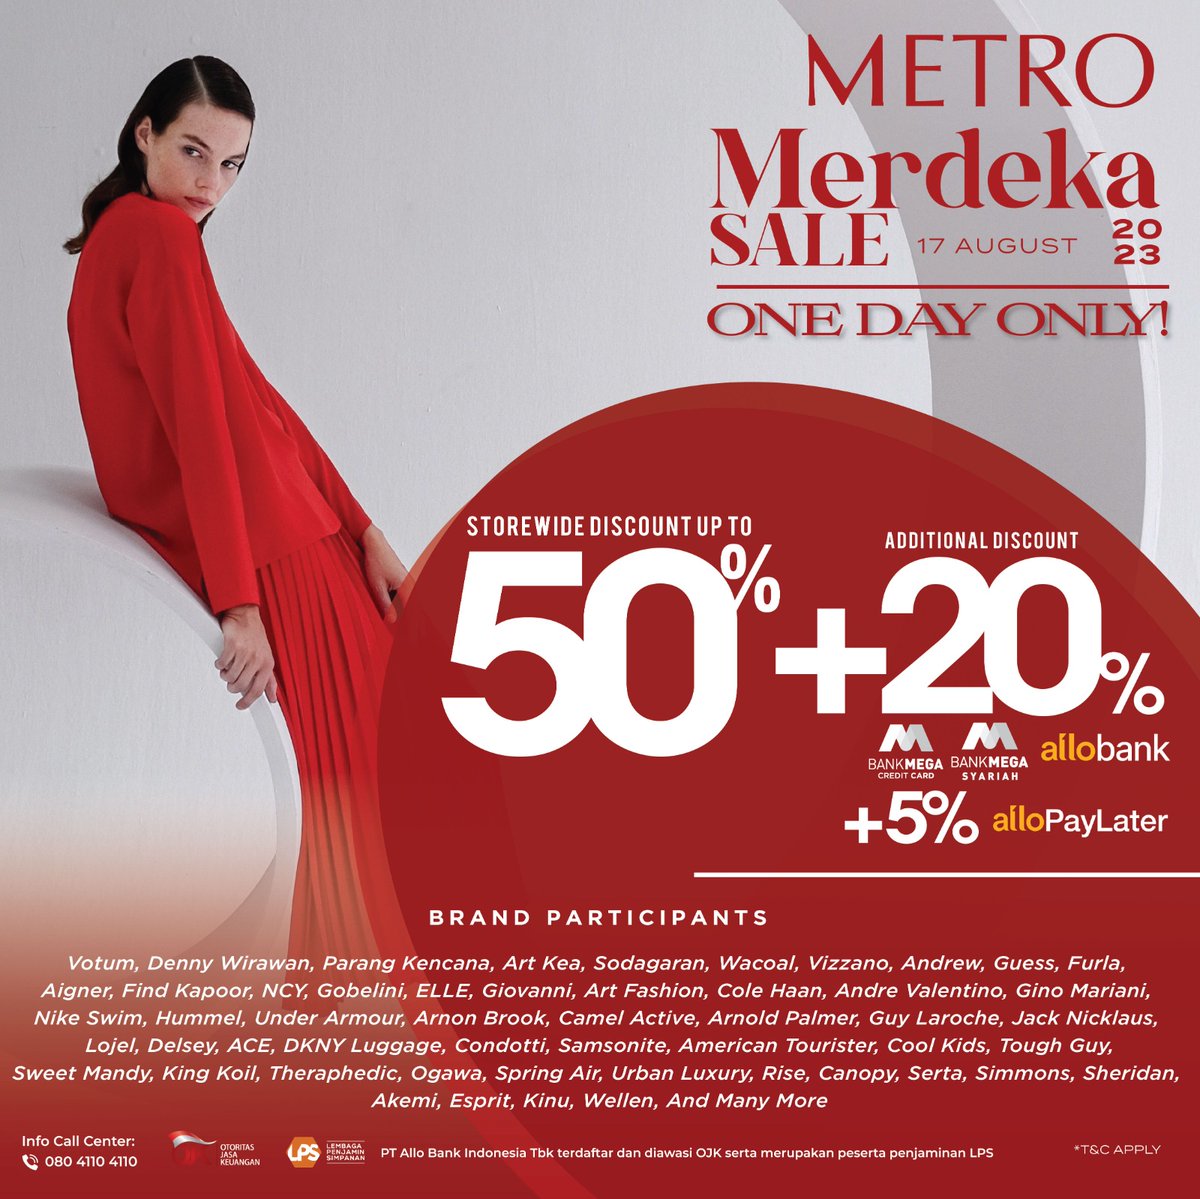 🇲🇨✨METRO MERDEKA SALE🛍🇲🇨

🎉ONE DAY ONLY🎉

SAVE THE DATE & BE THE FIRST TO SHOP!

📅 Thursday, 17 August 2023
⏰ Starts 10 AM
📍All METRO Department Store

#metrodeptstore #ShopAtMETRO #METROMerdekaSALE #MERDEKASaleDiMETRO #BelanjaMERDEKAdiMETRO #DiMETRO